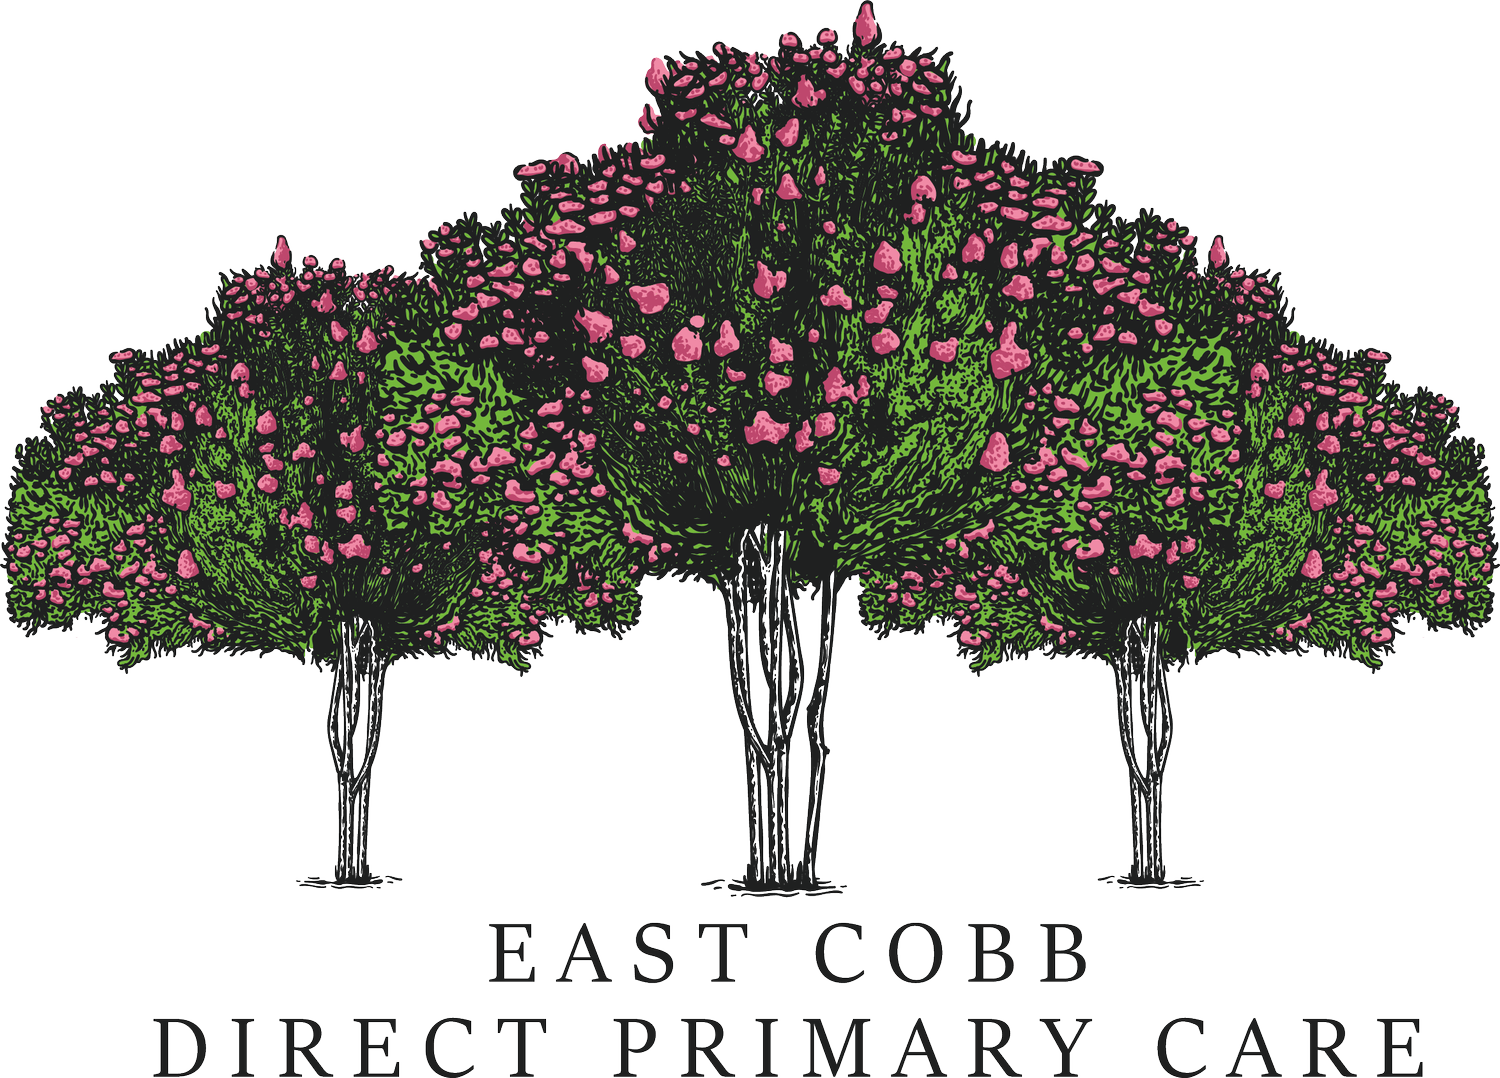 East Cobb Direct Primary Care